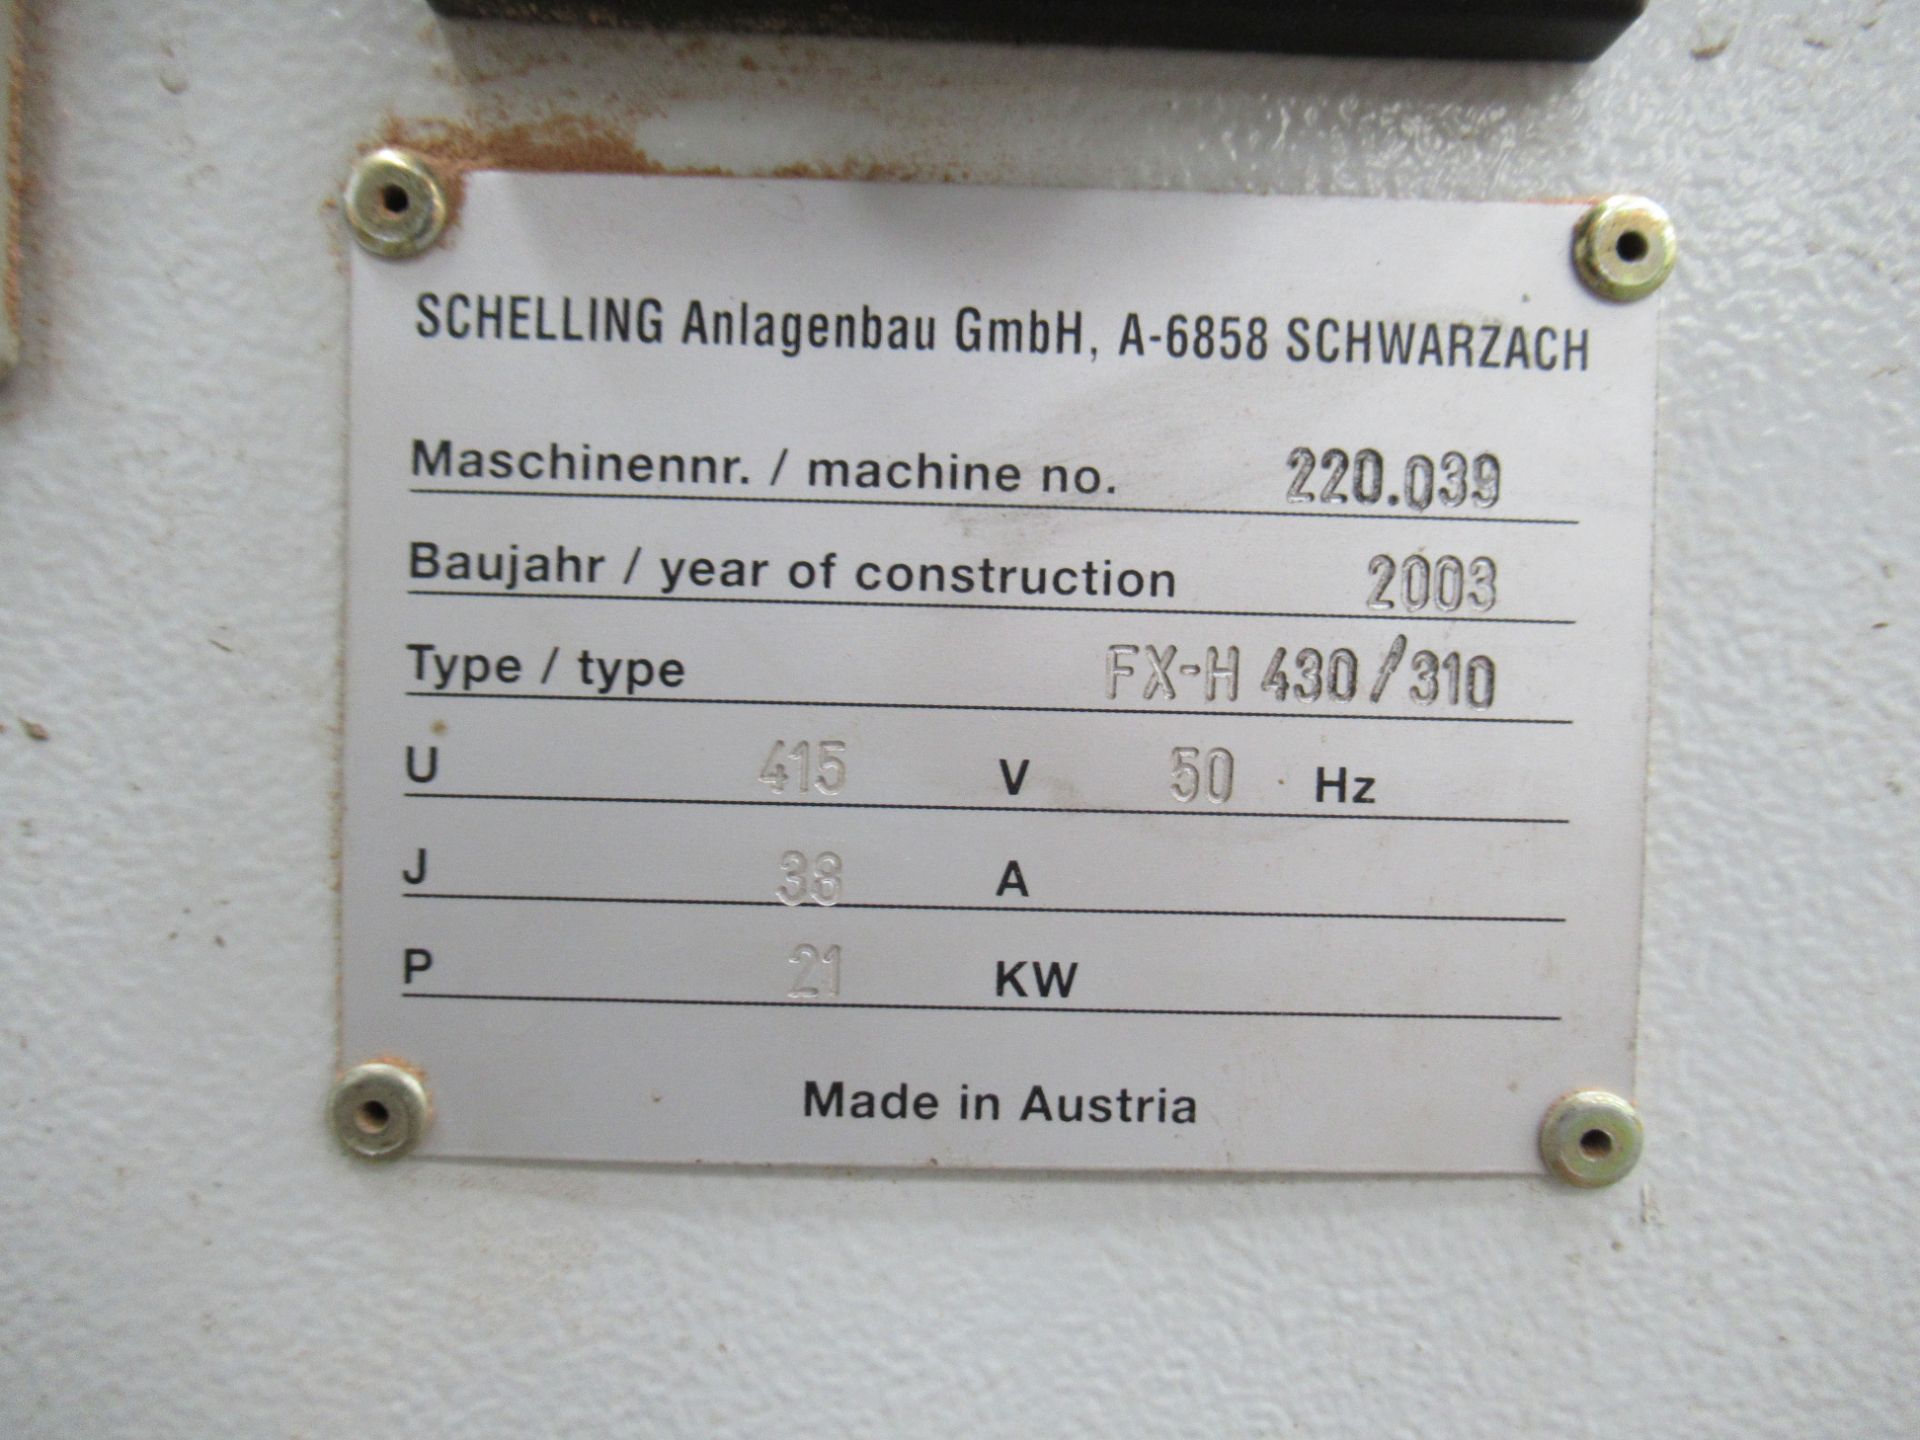 A Schelling FXH430/310 Beamsaw, YOM 2003, dismantled from site. - Image 12 of 16